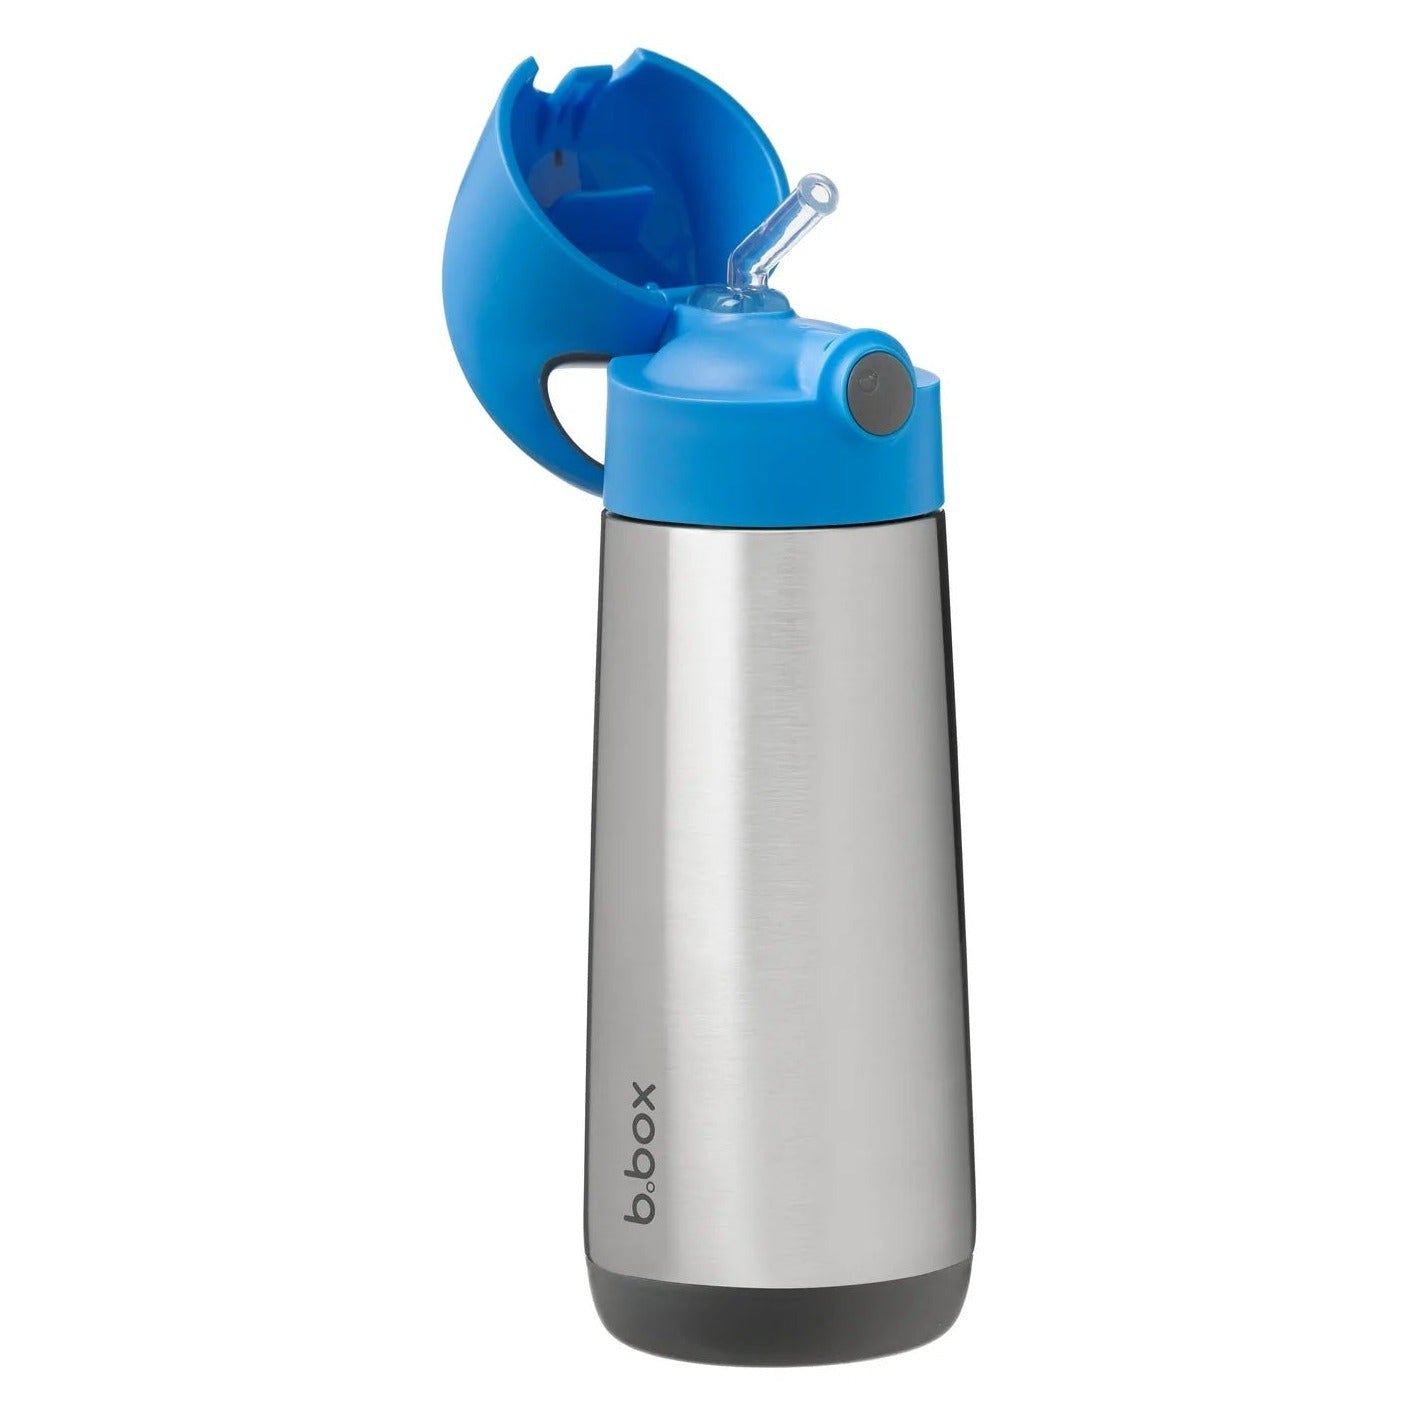 bbox insulated drink bottle - angus and dudley